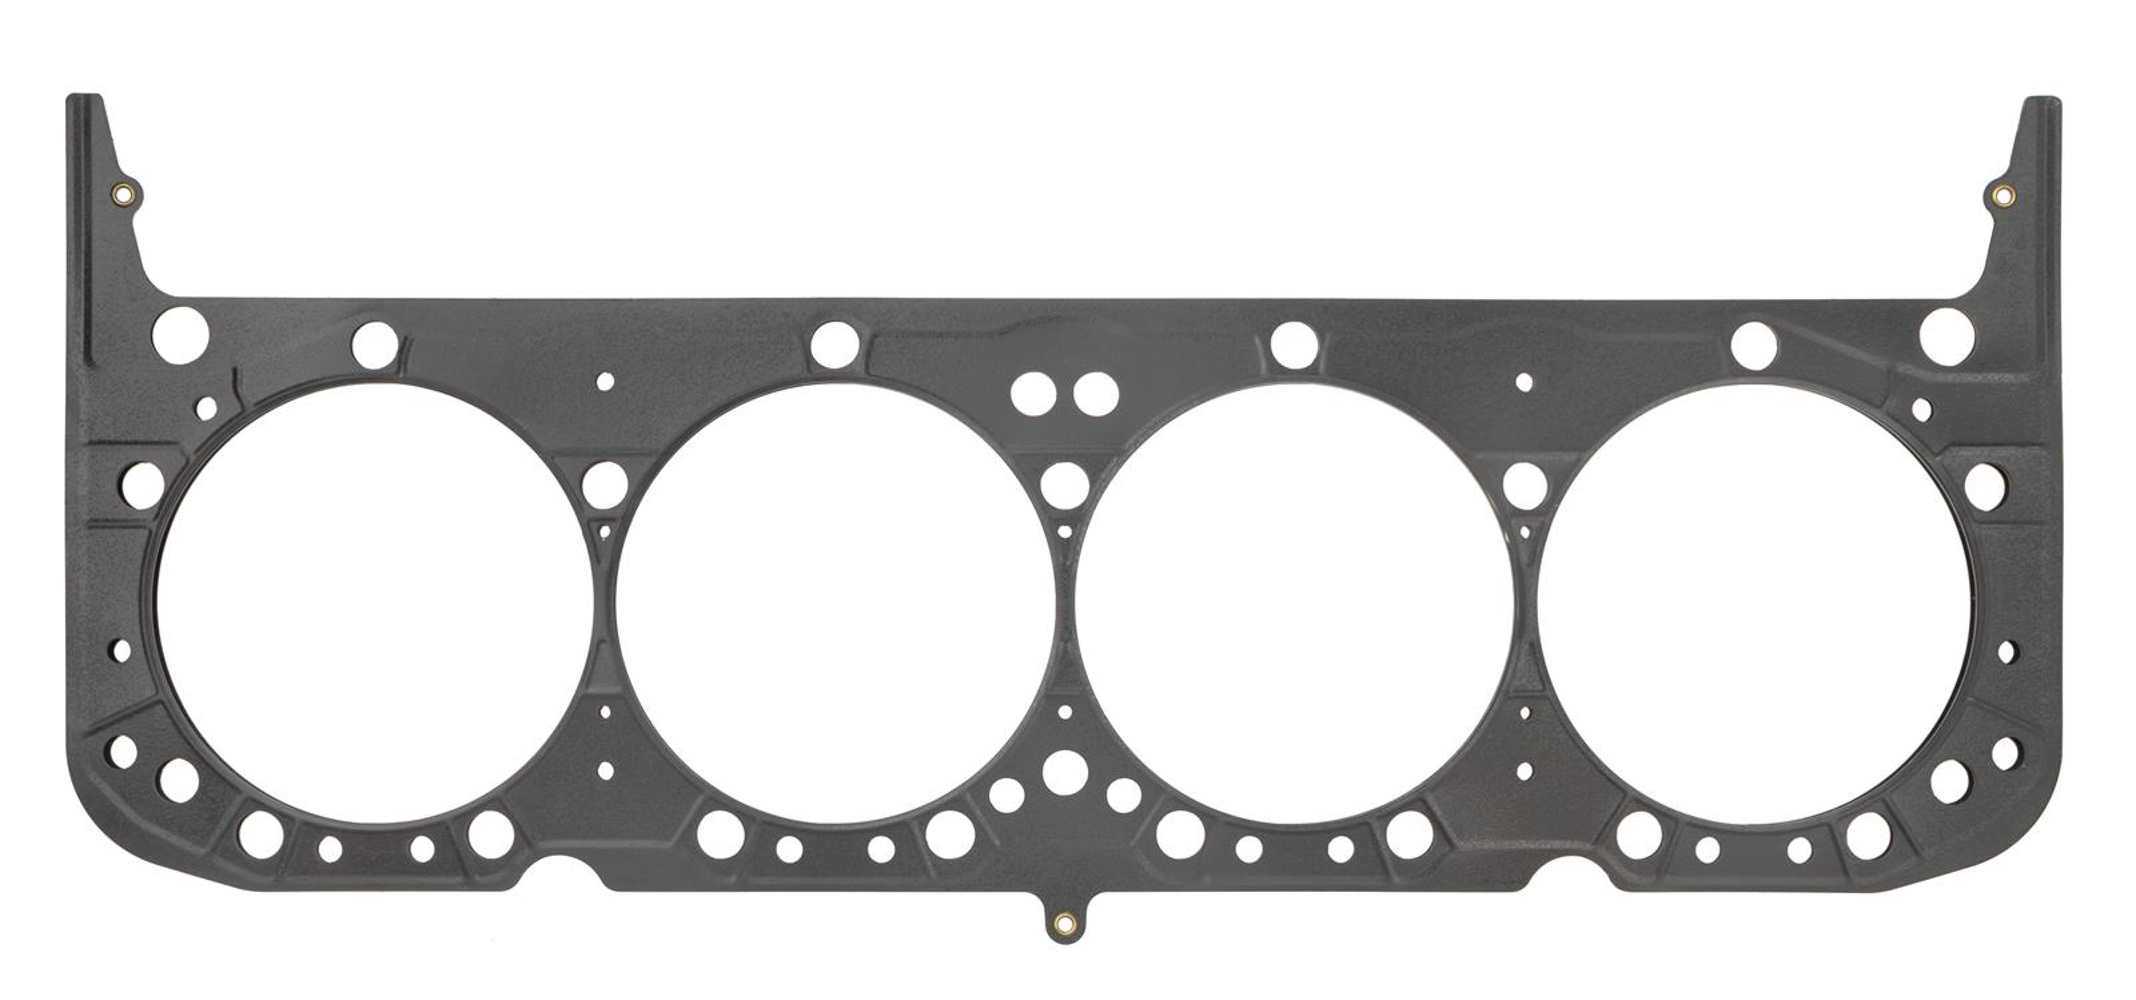 SCE Gaskets M112139 - Cylinder Head Gasket, MLS Spartan, 4.213 in Bore, 0.039 in Compression Thickness, Multi-Layer Steel, Small Block Chevy, Each